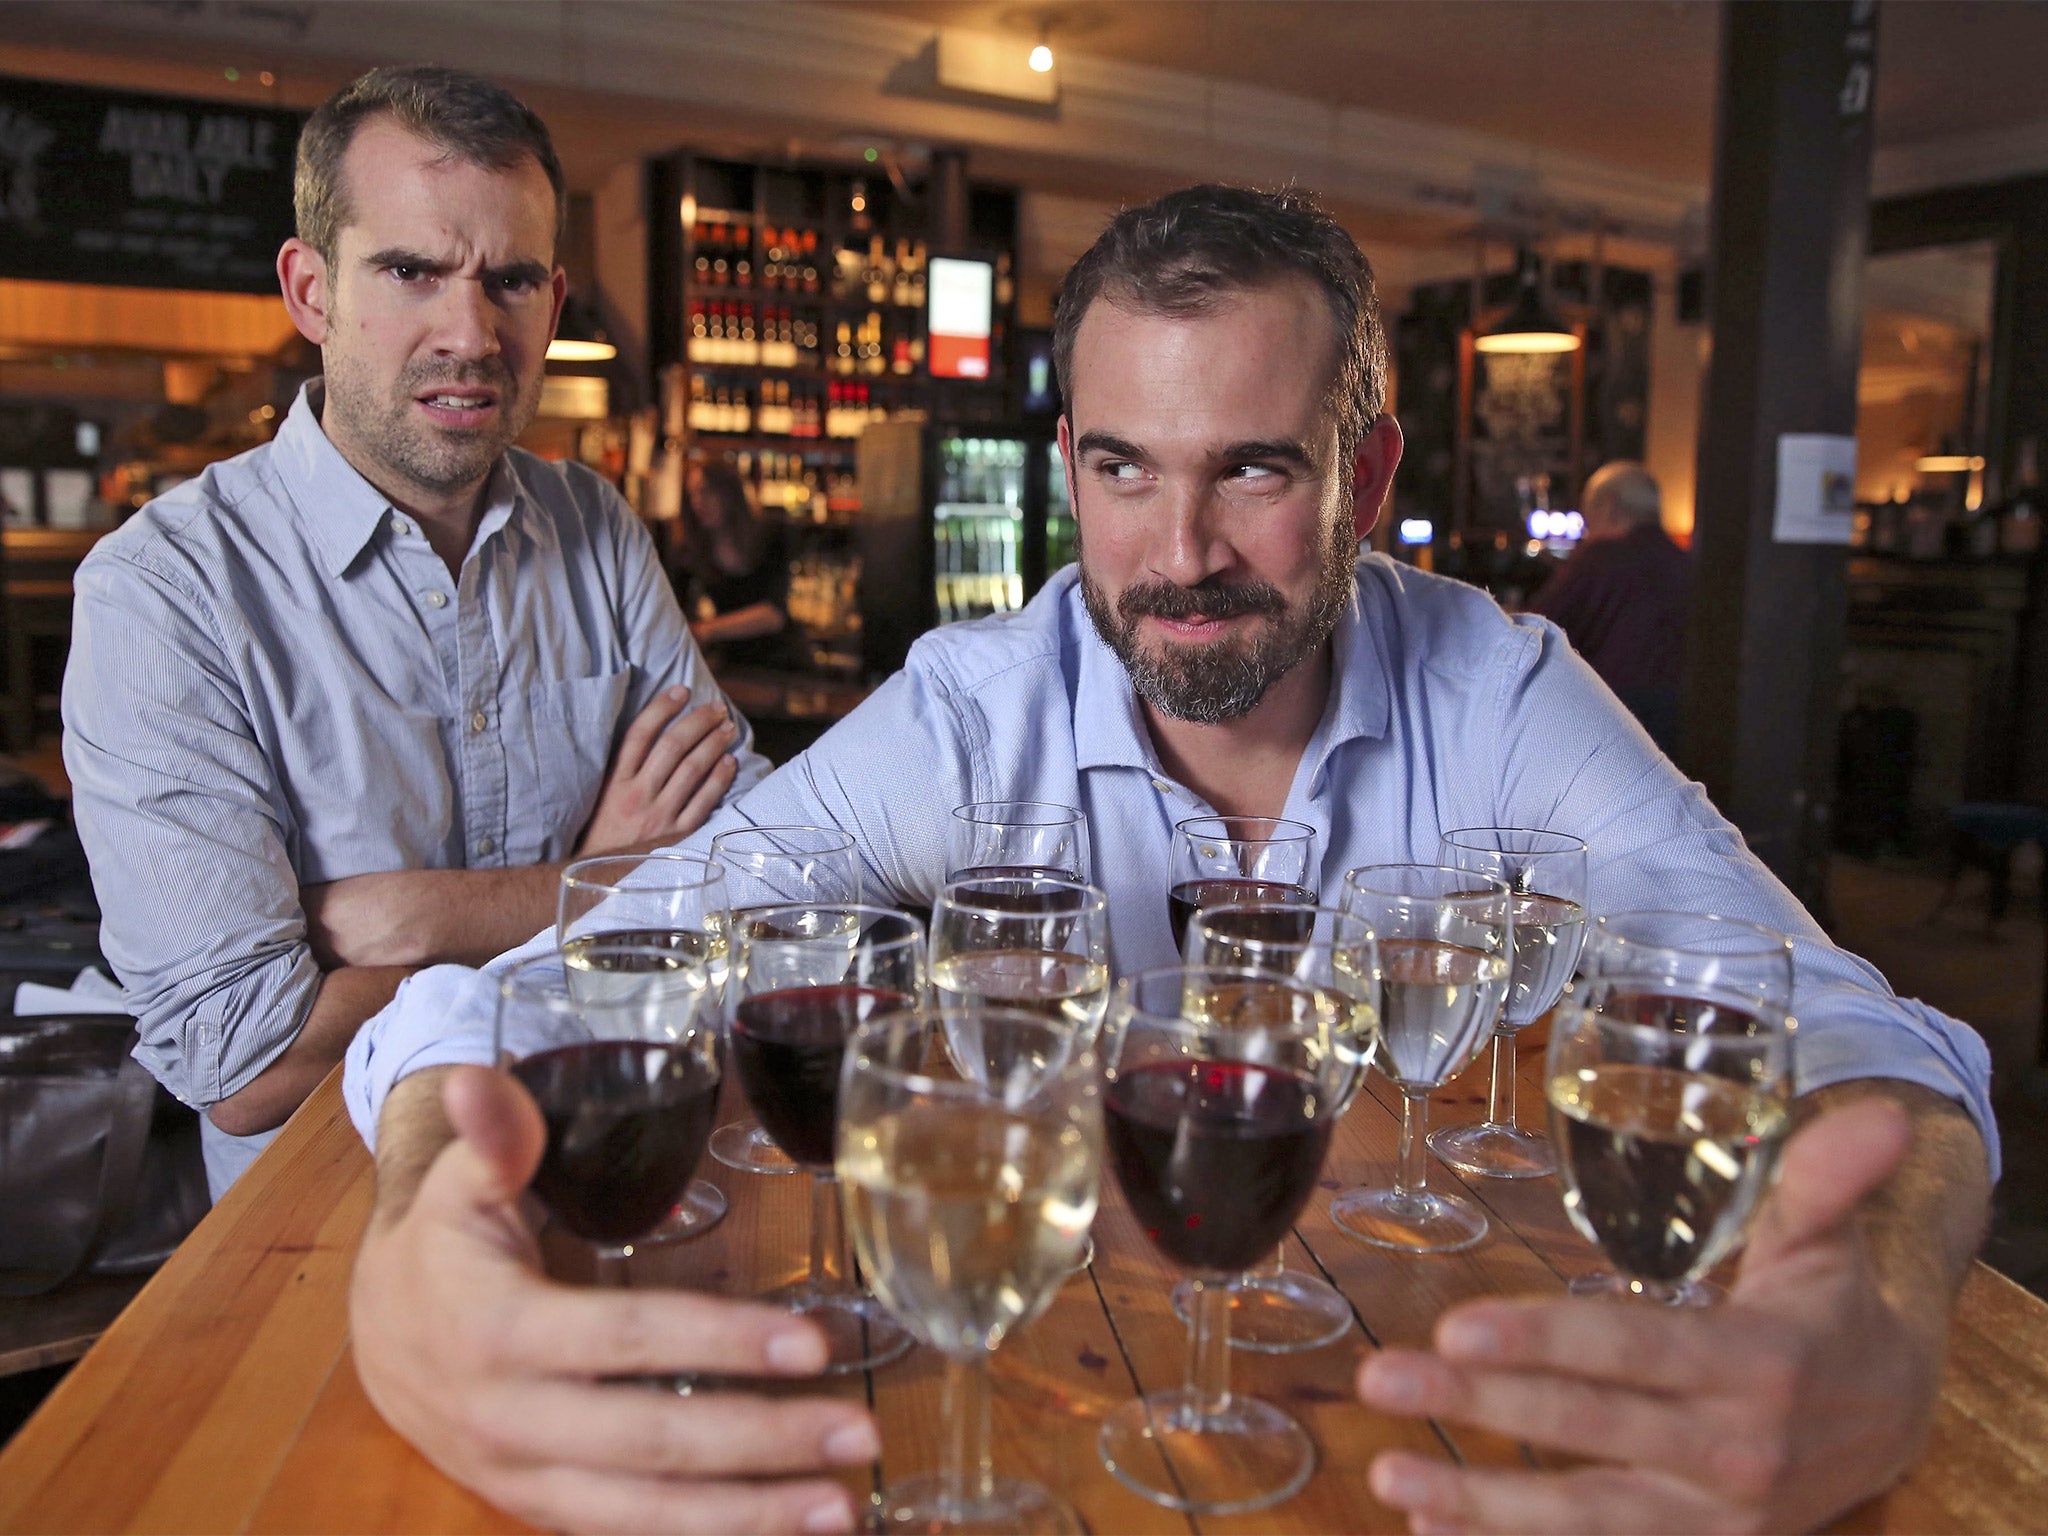 A glass act: Dr Chris van Tulleken (left) and twin Xand get set for their drinking challenge